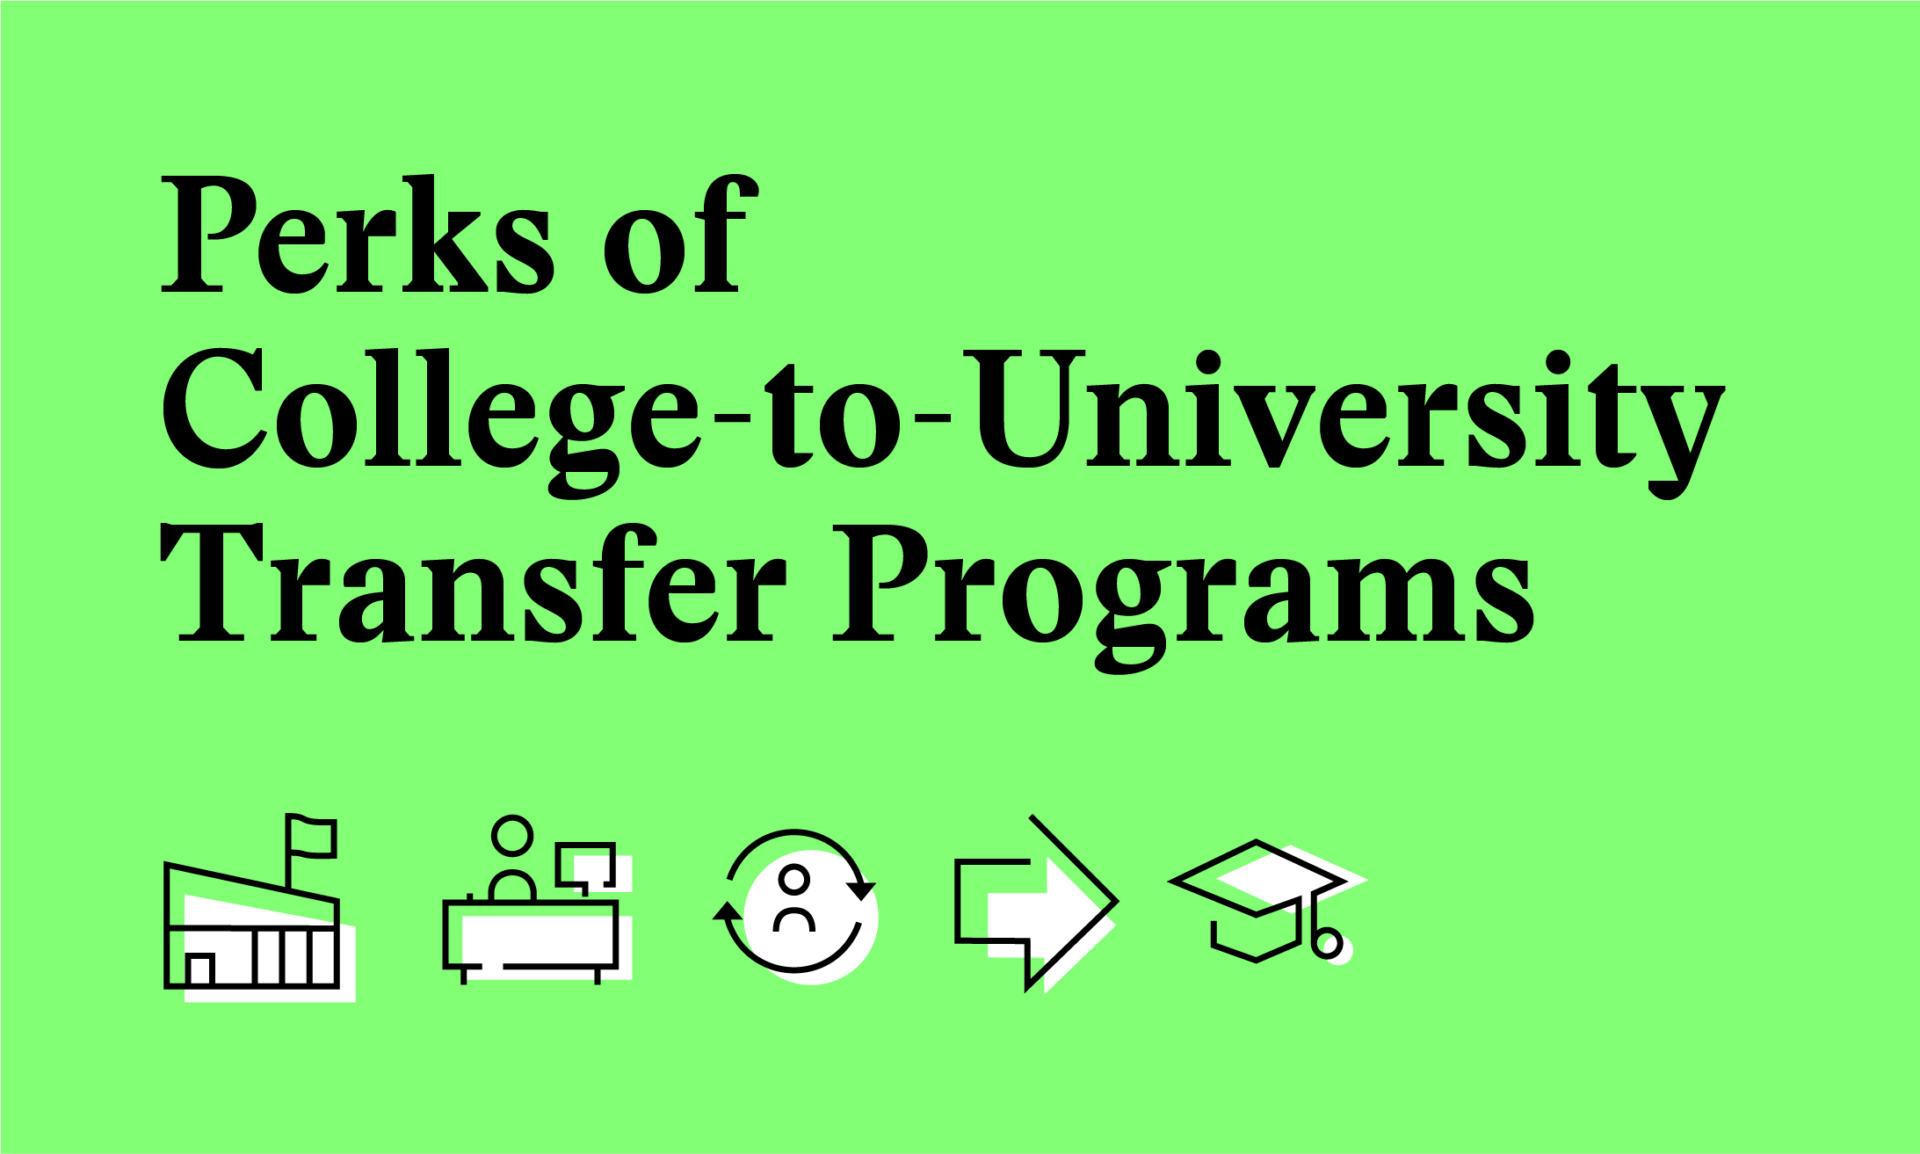 Graphic outlining the perks of college-to-university transfer programs.